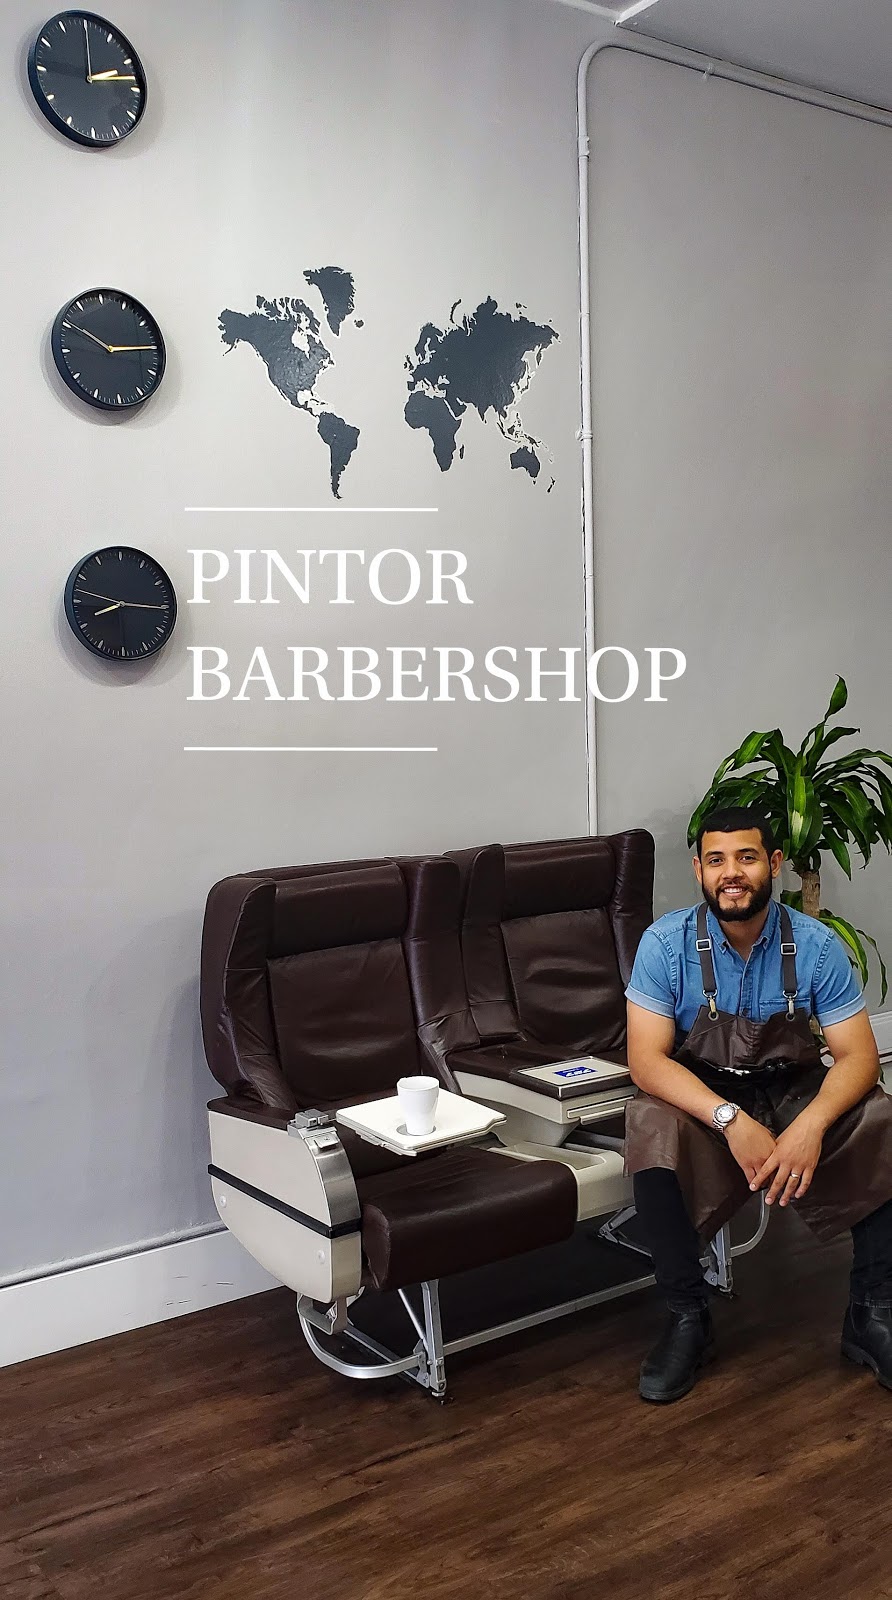 Pintor Barbershop Vancouver | hair care | 2951 W 4th Ave #1, Vancouver, BC V6K 1R3, Canada | 6045687272 OR +1 604-568-7272